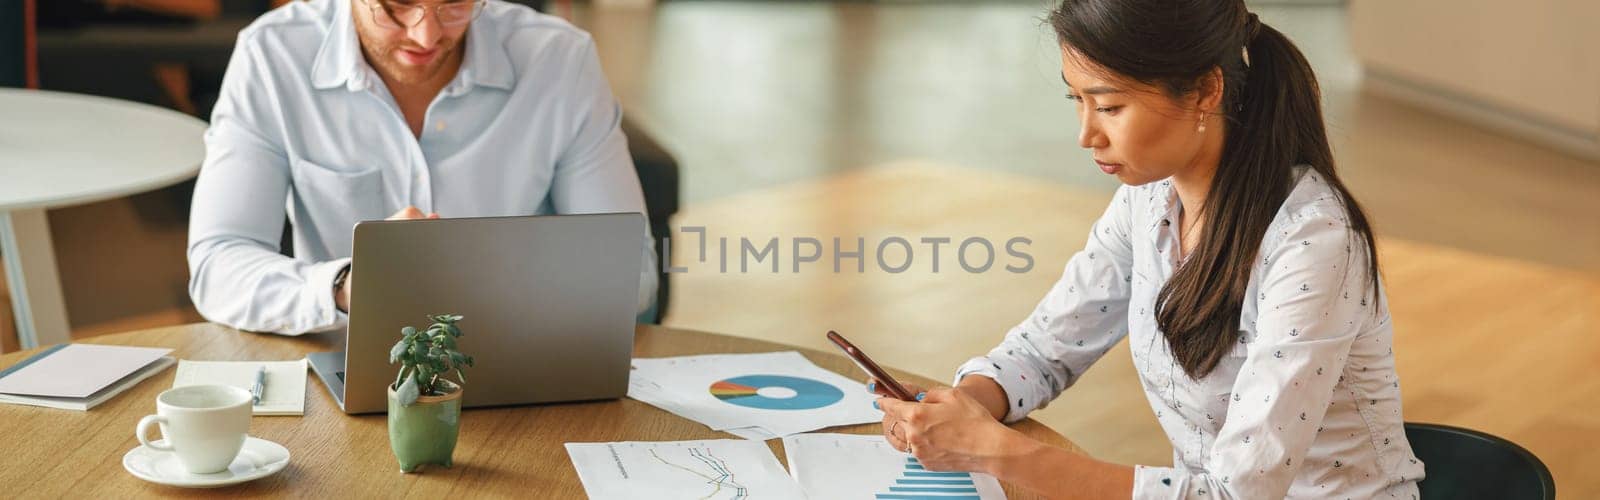 Two business colleagues working with documents together sitting in office.High quality photo